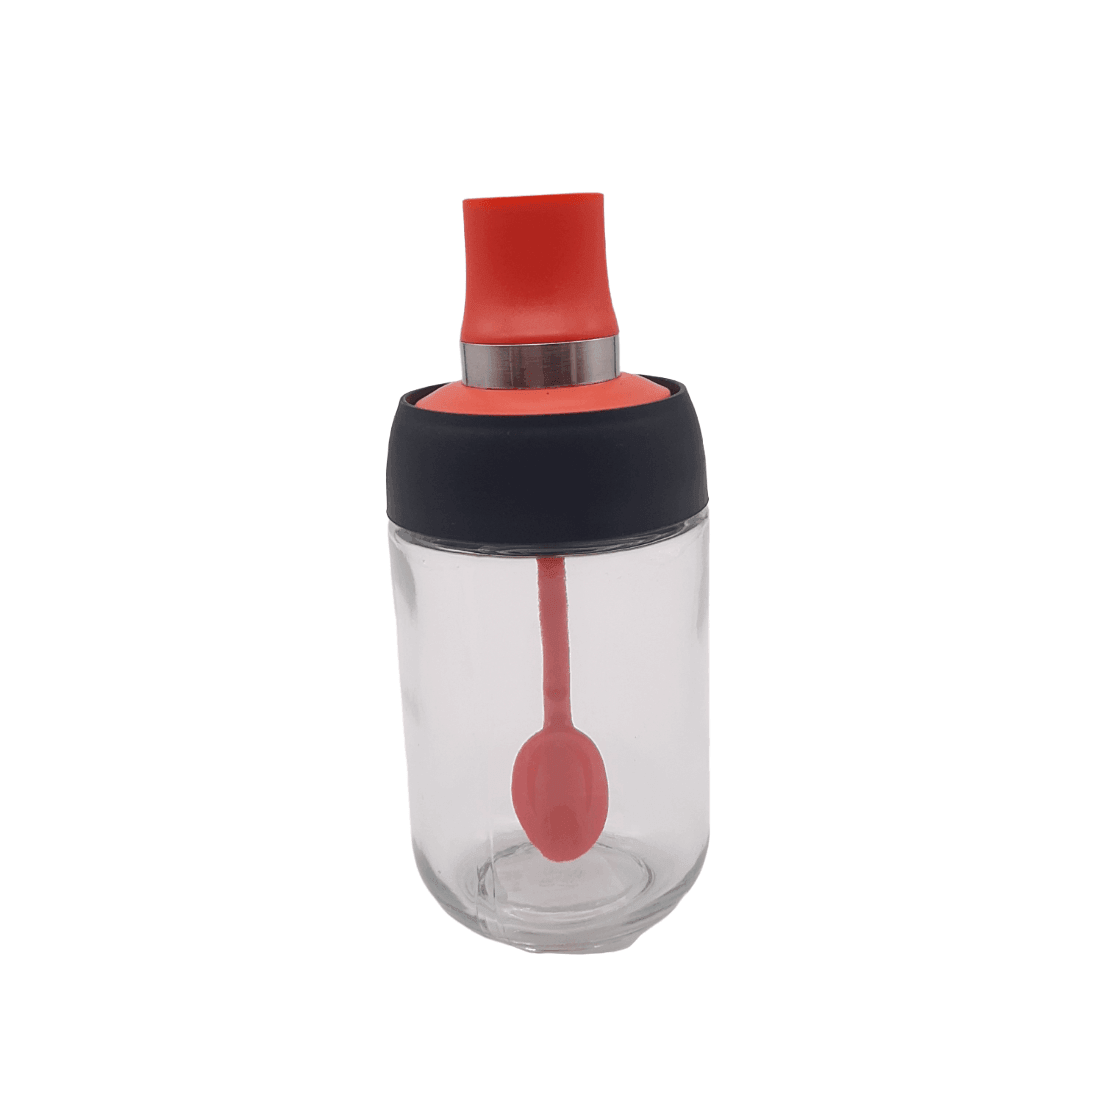 Glass Spice Jar with Red Spoon - Home And Trends